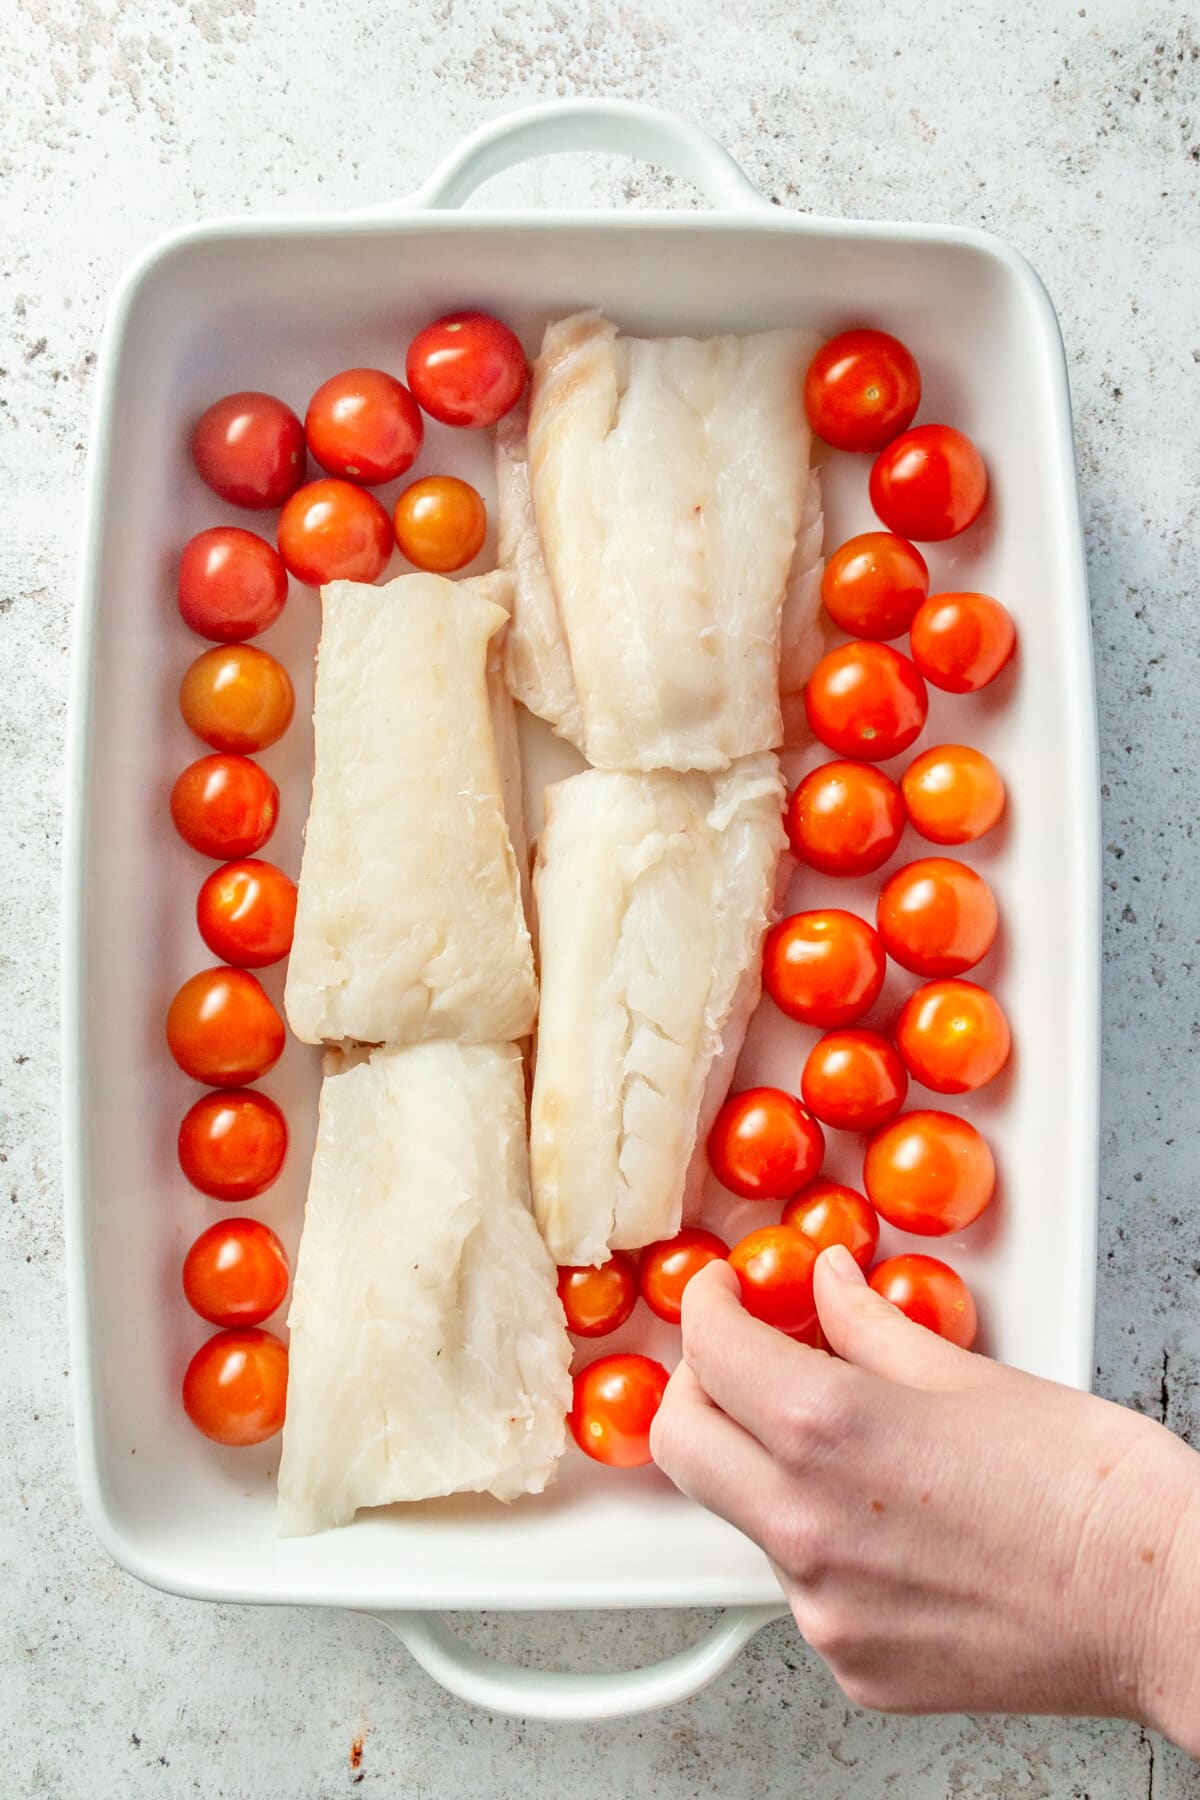 Cherry tomatoes are shown being added to a white rectangular baking dish which holds four cod filets.